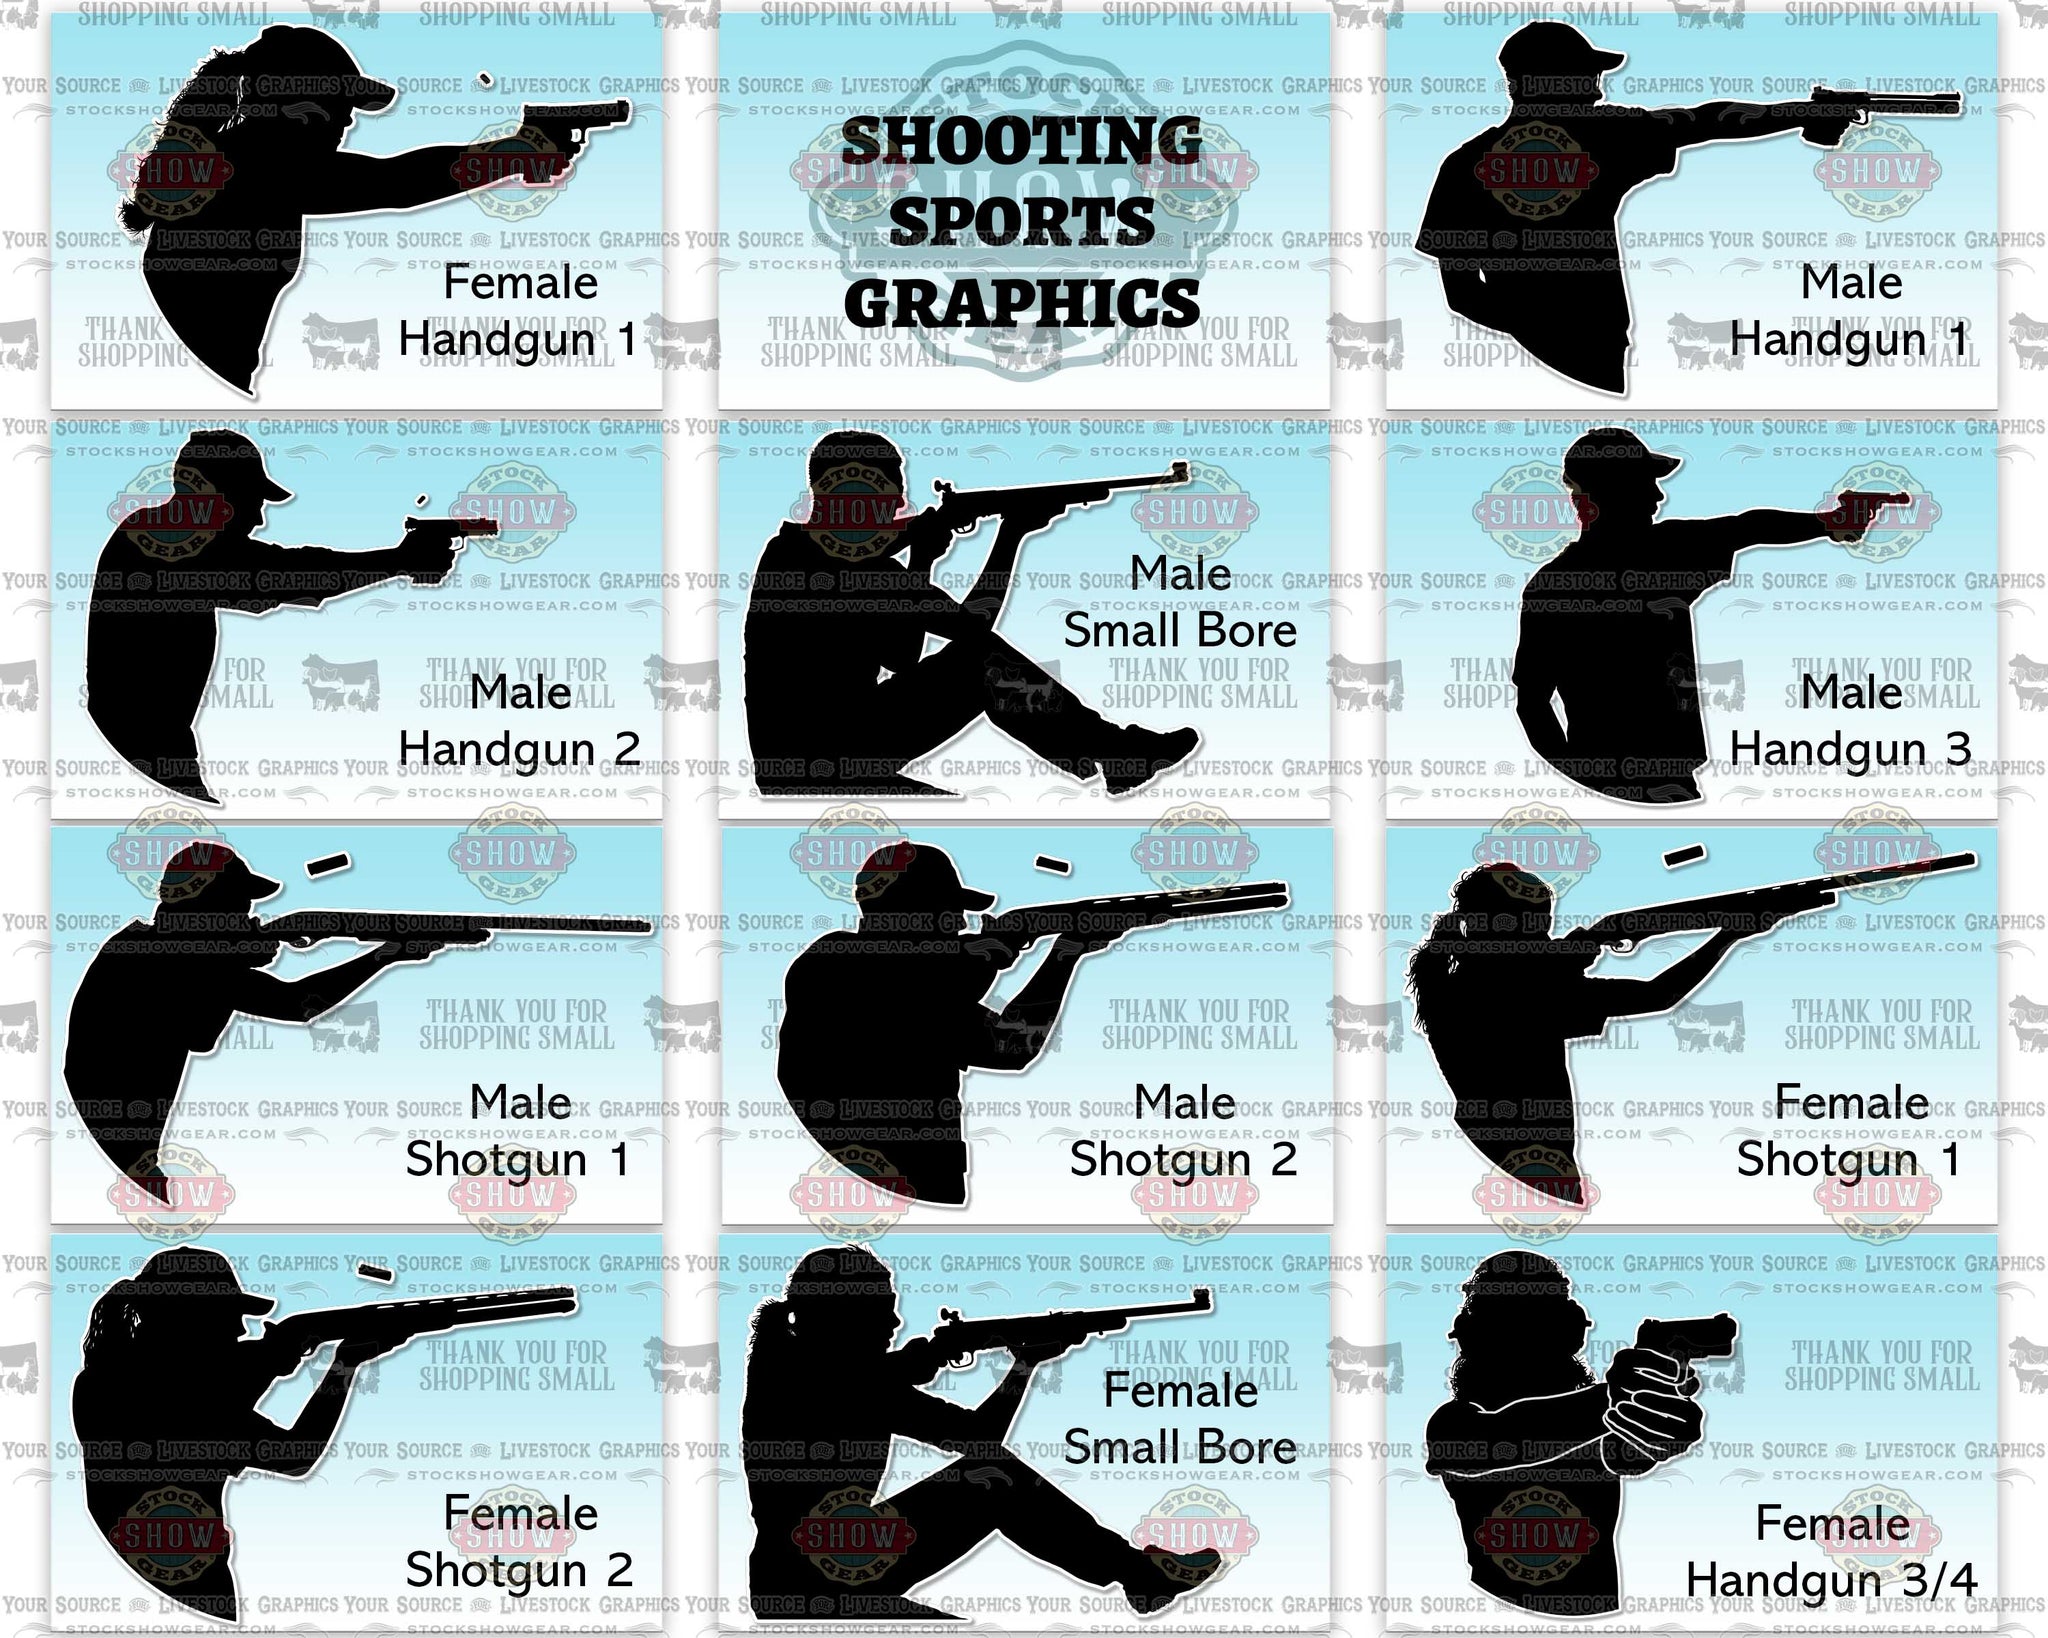 Shooting Sports Graphics-Add Choice to Cart